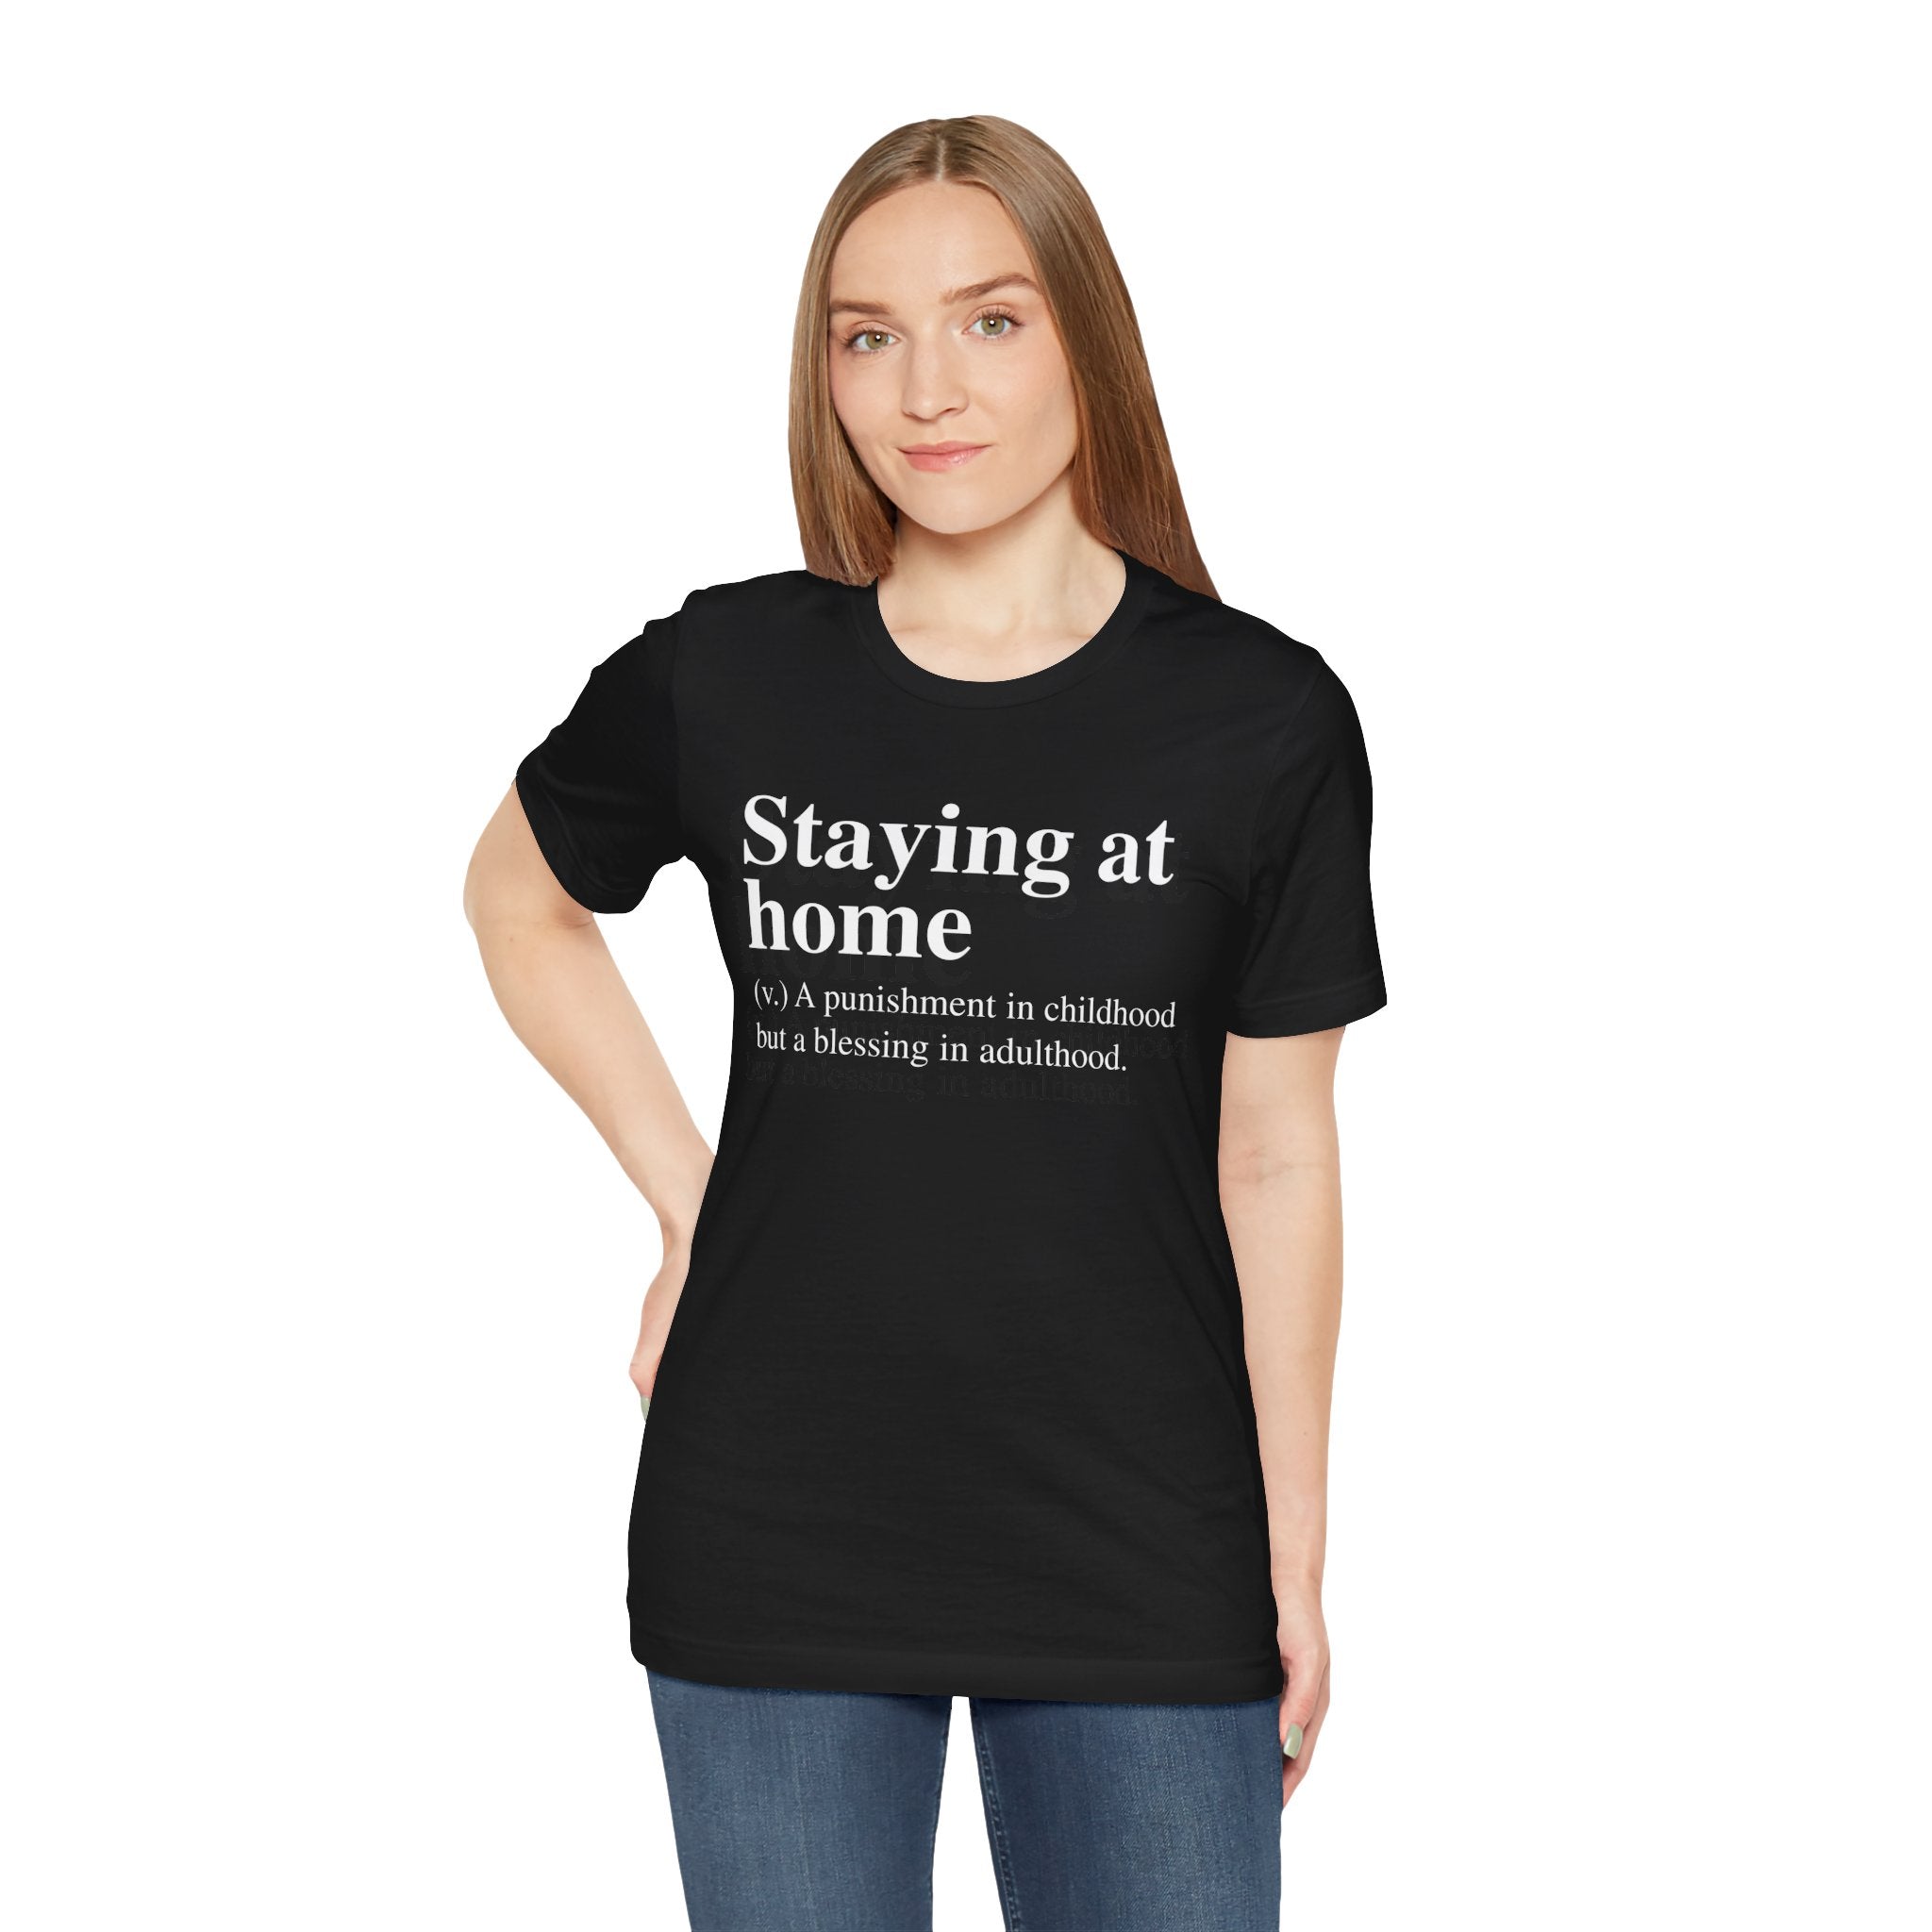 A woman in a black Staying at Home T-Shirt with the text "staying at home: a punishment in childhood but a blessing in adulthood.